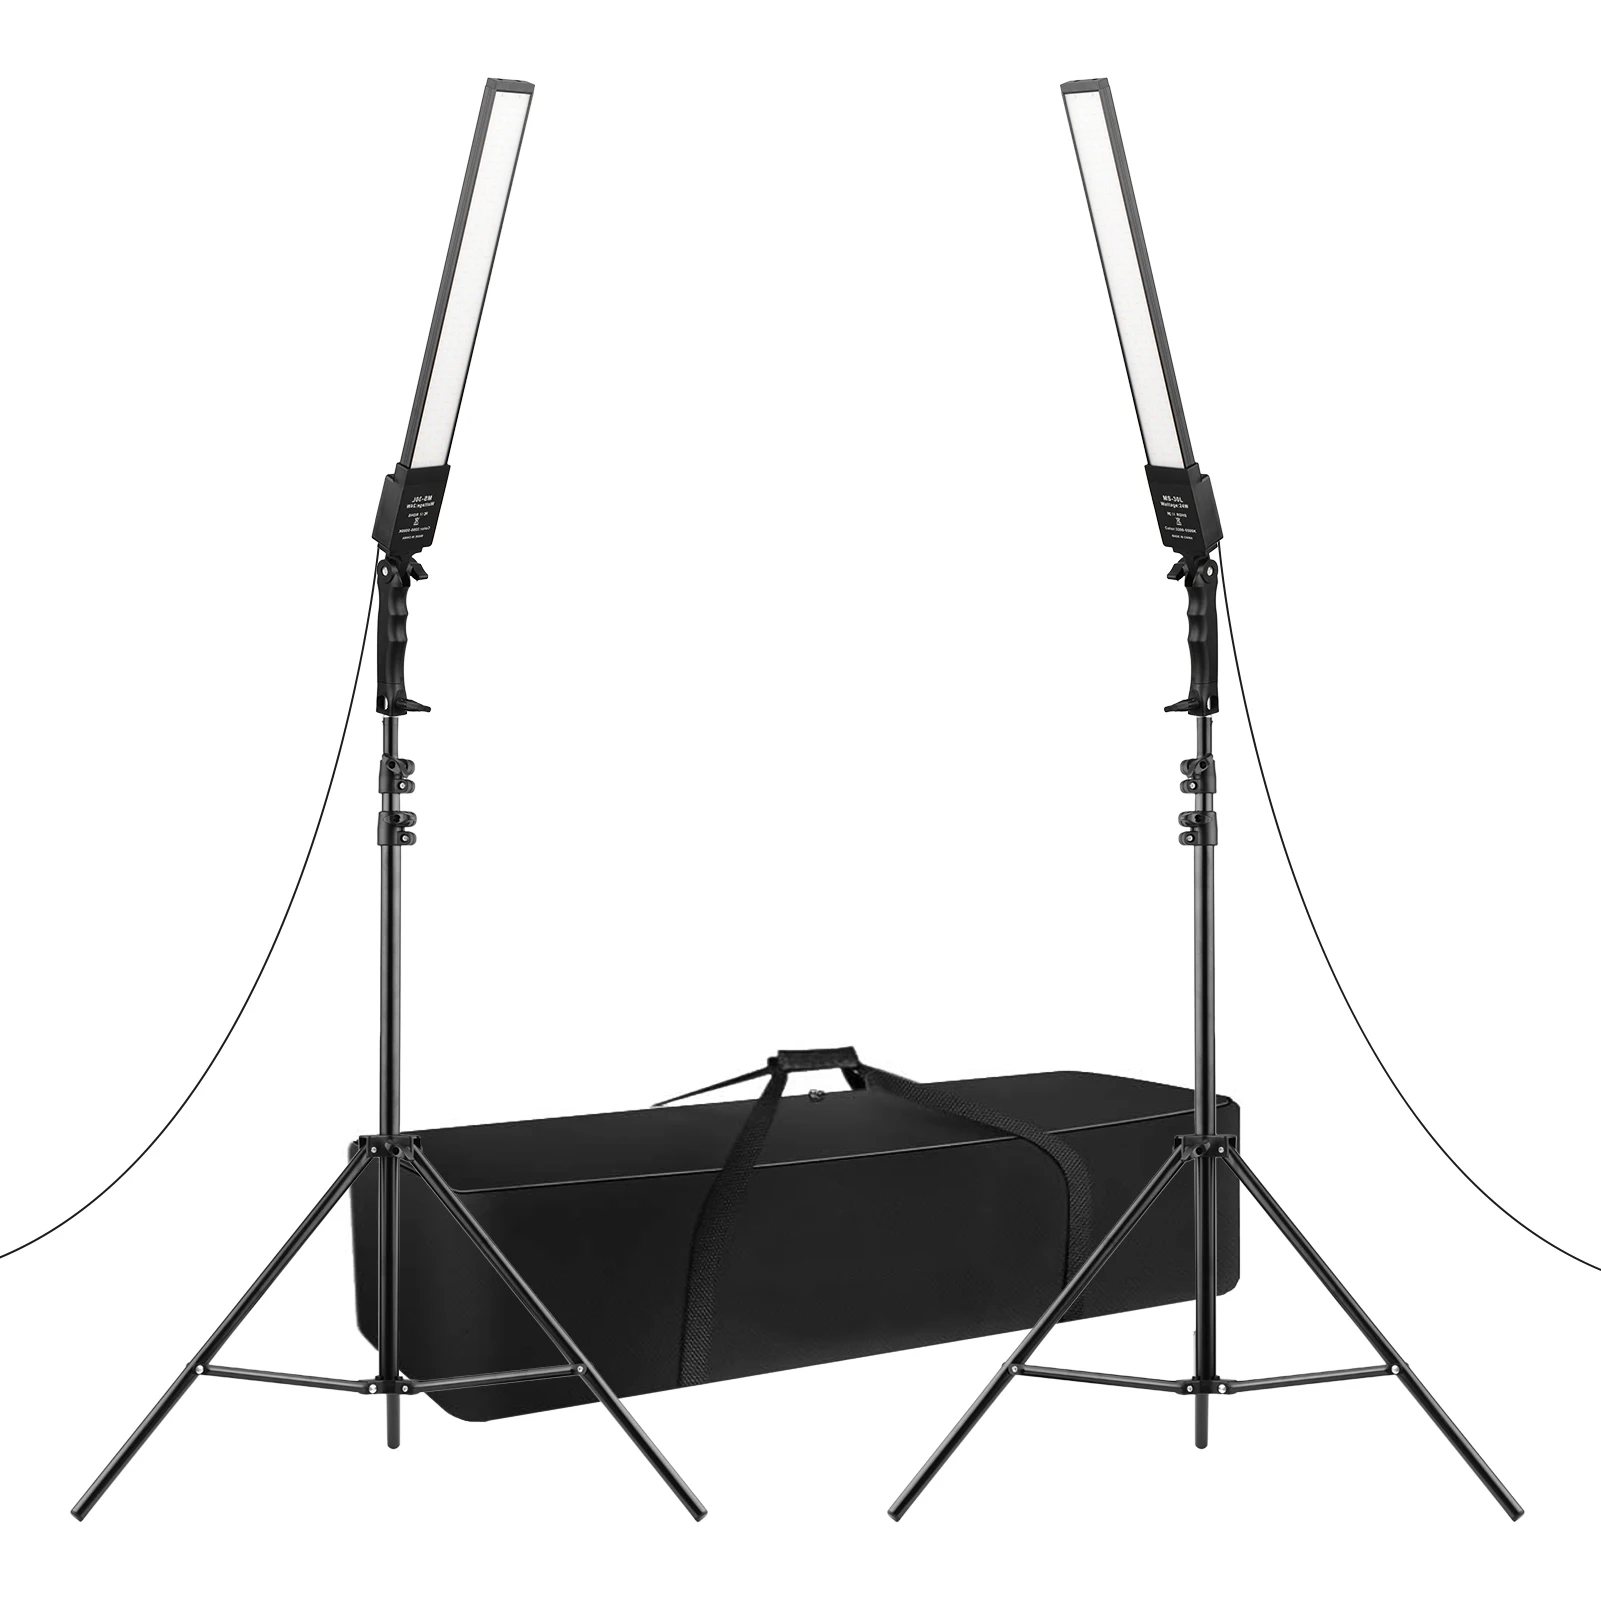 

Professional Photography Studio LED Light Kit with 2pcs 3200-5500K Bi-color Dimmable LED Video Light Bar Strip Light and Stands